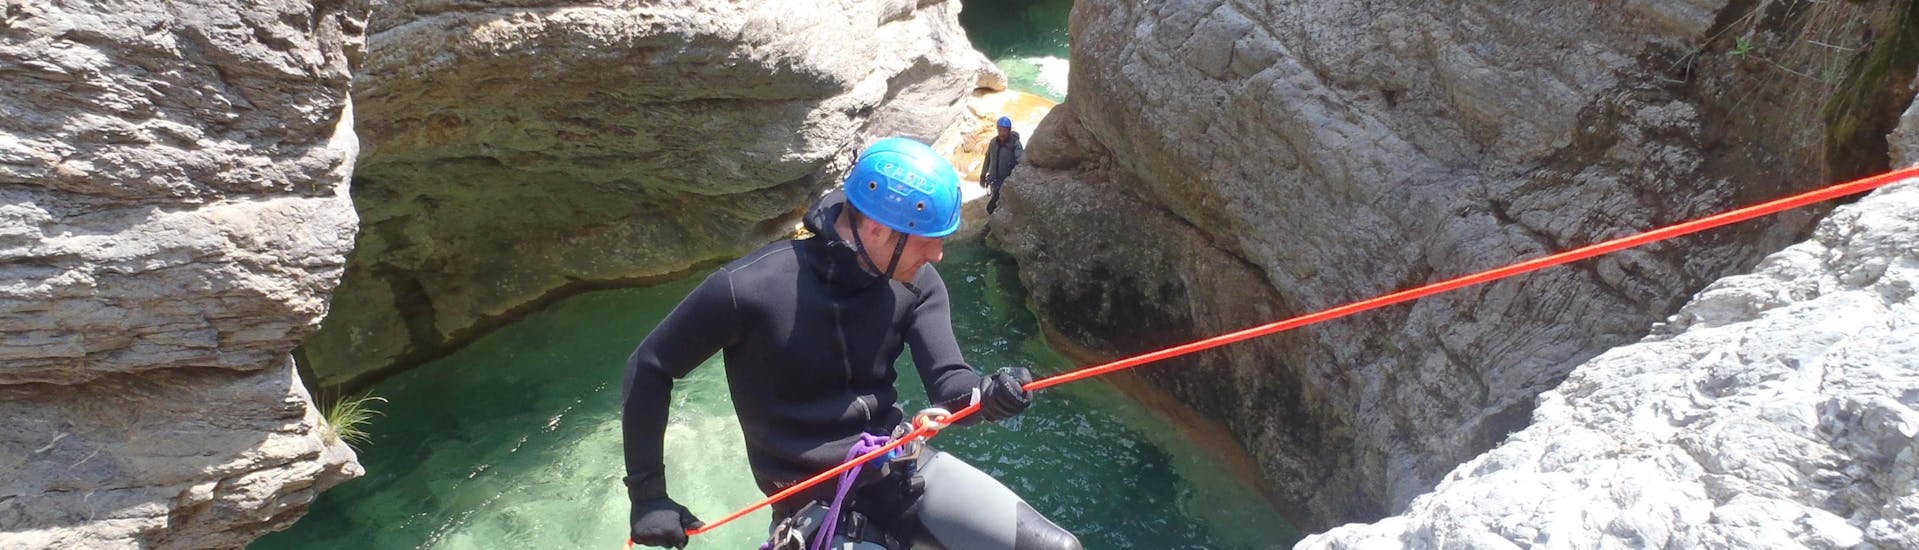 Sportliche Canyoning-Tour in Bevera - Canyon of Barbaira.